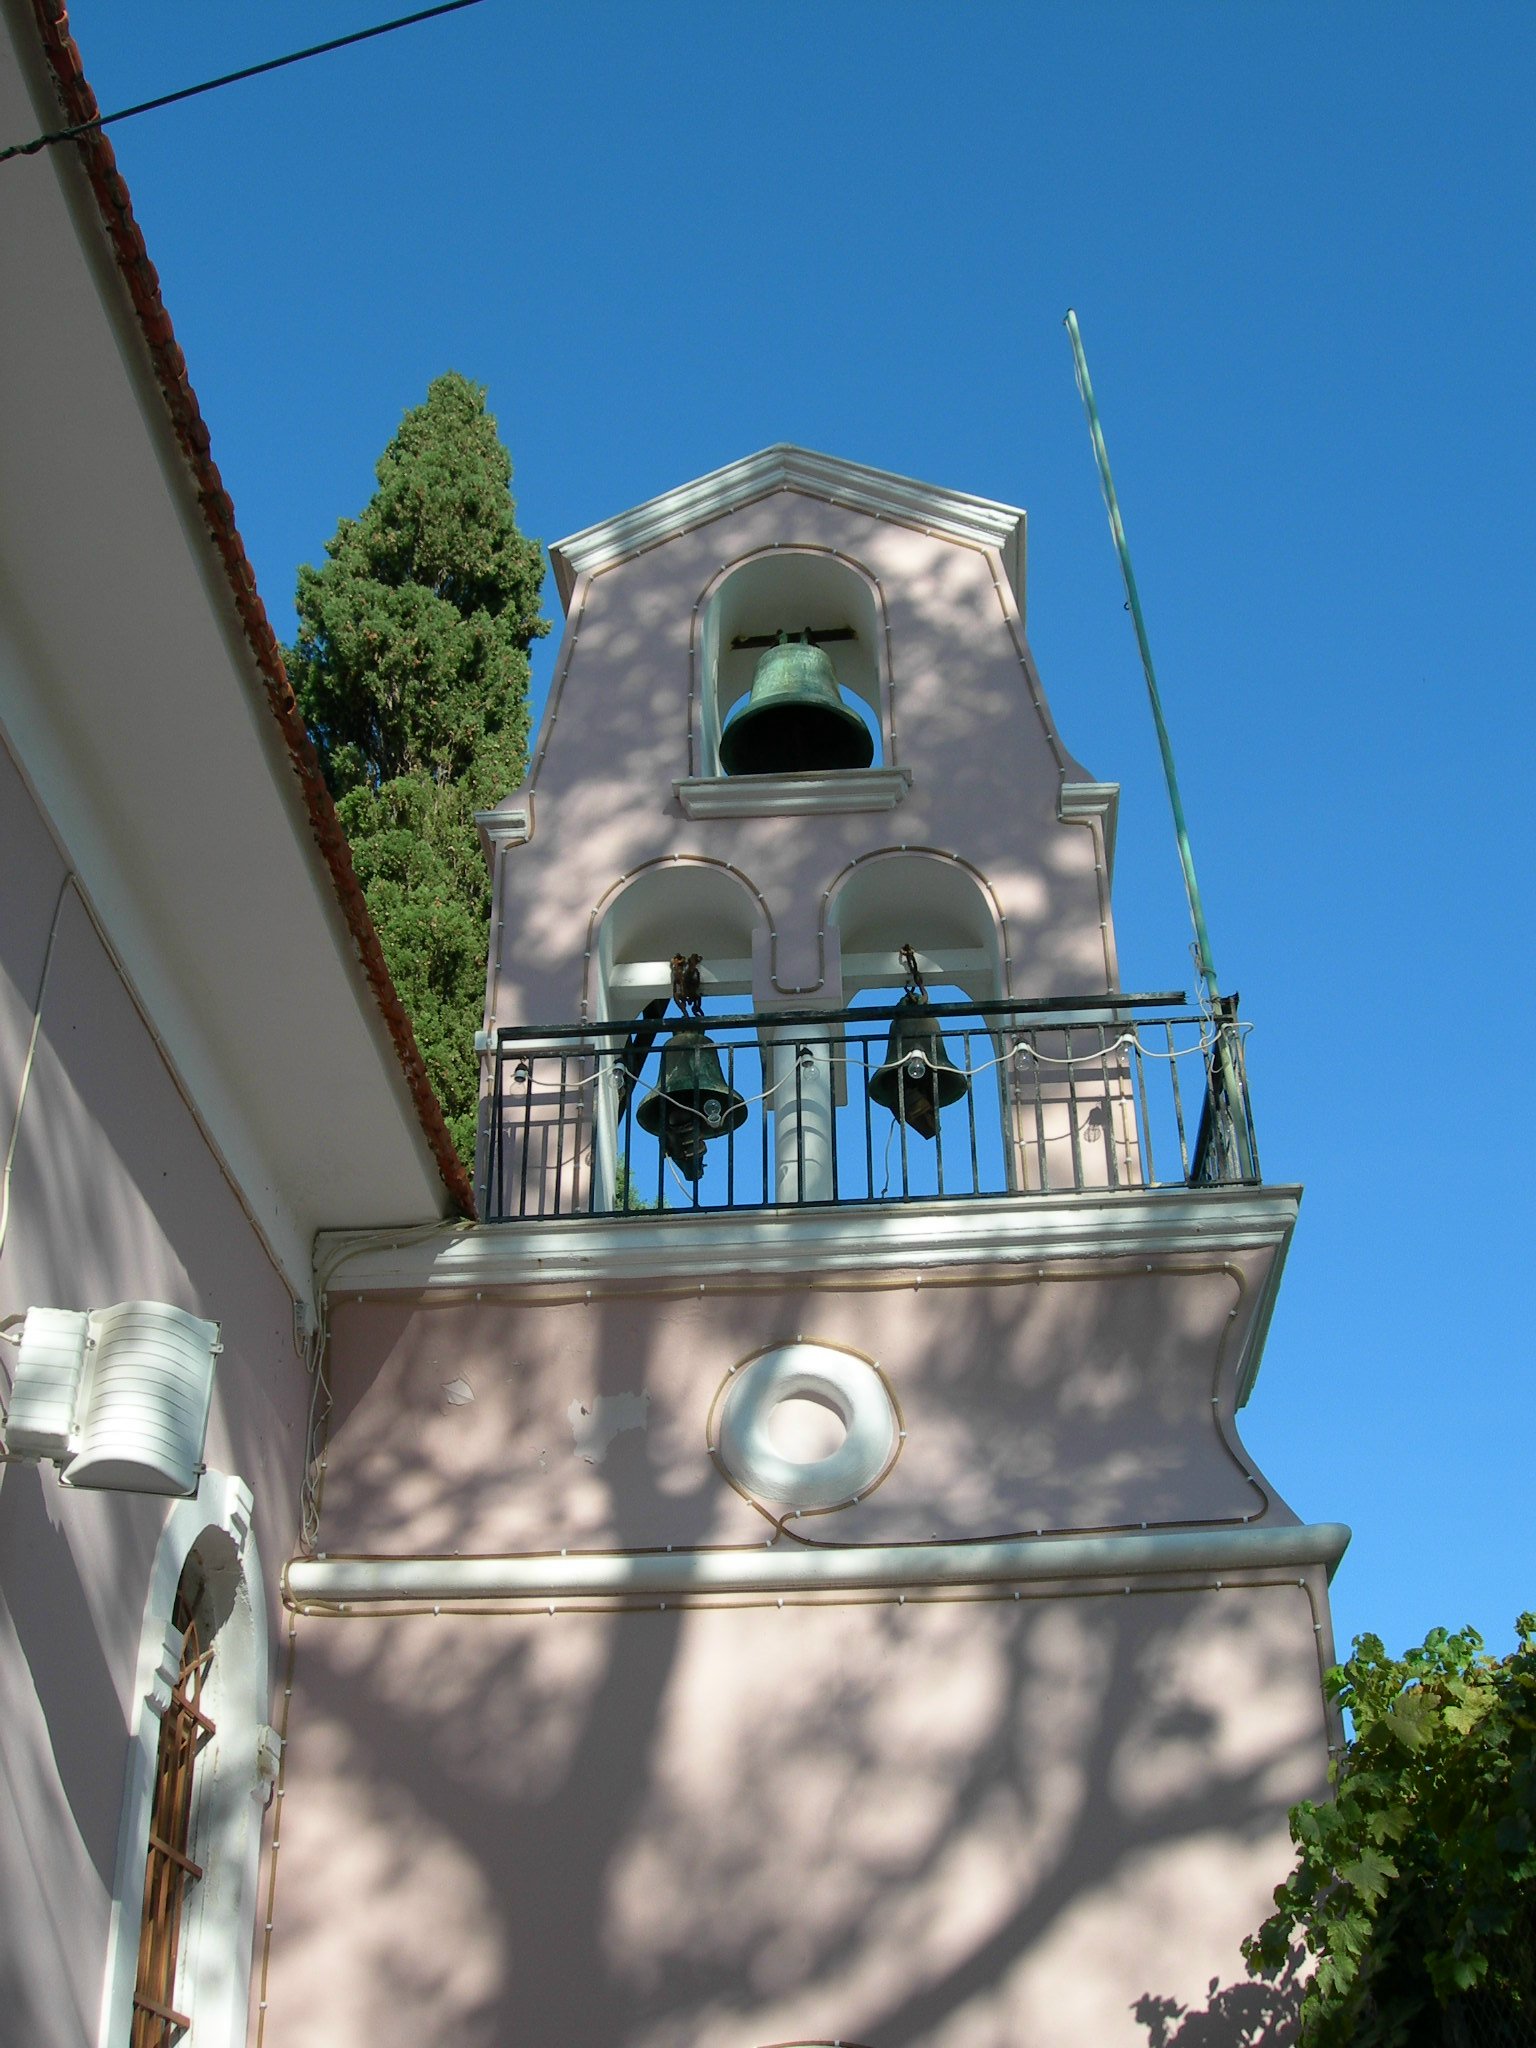 a bell tower stands on top of an older building